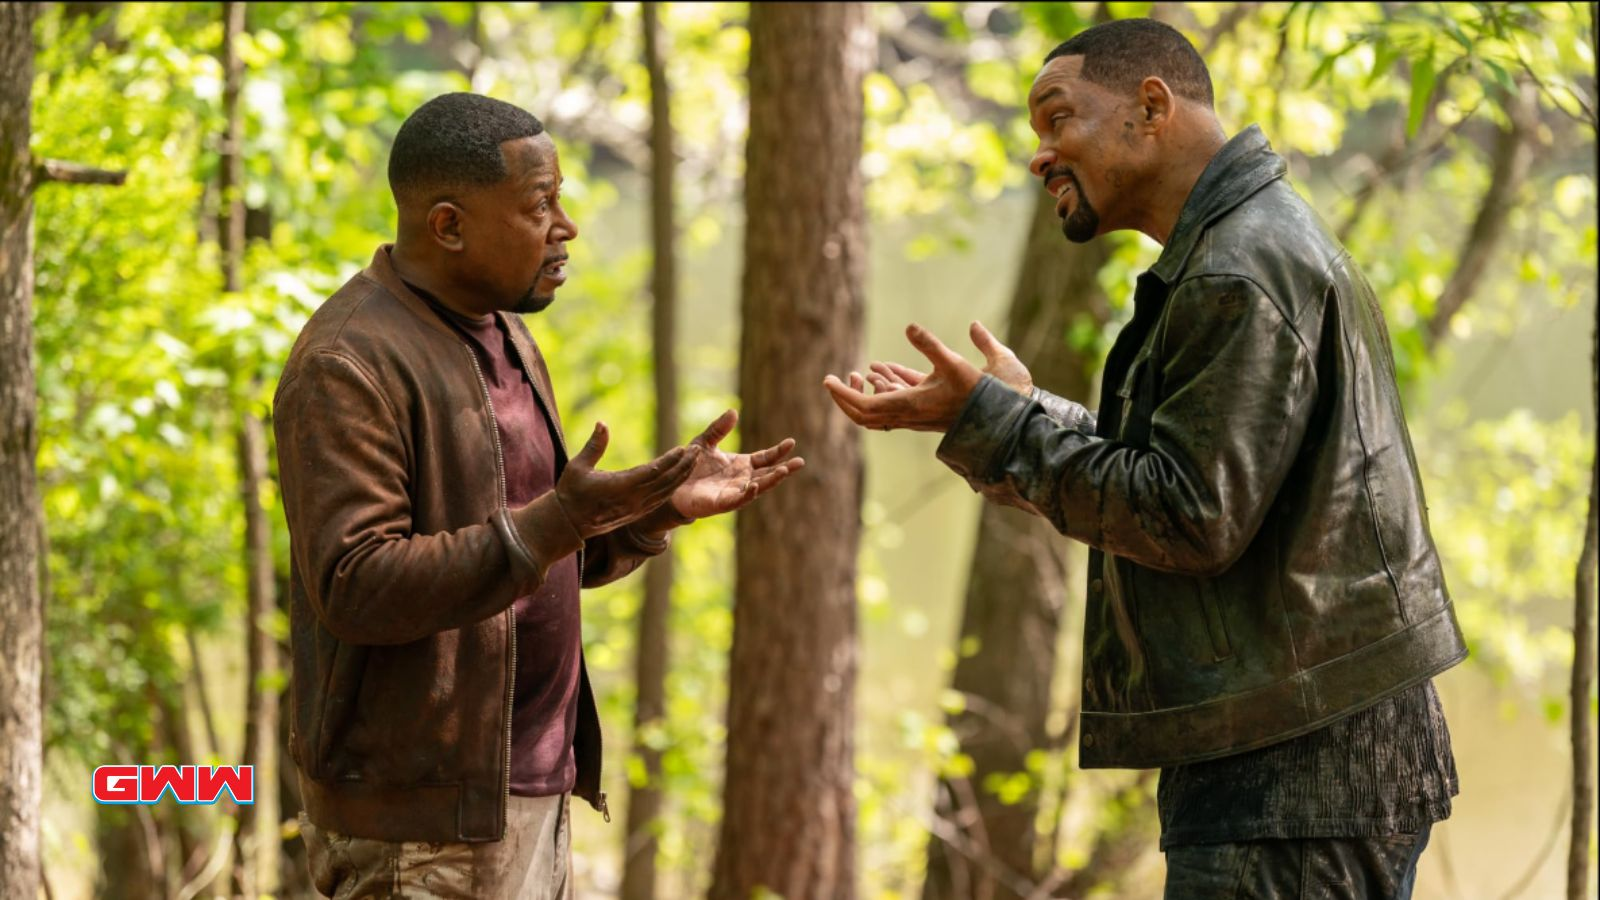 Mike Lowrey and Marcus Burnett talking animatedly, Bad Boys 4 release date